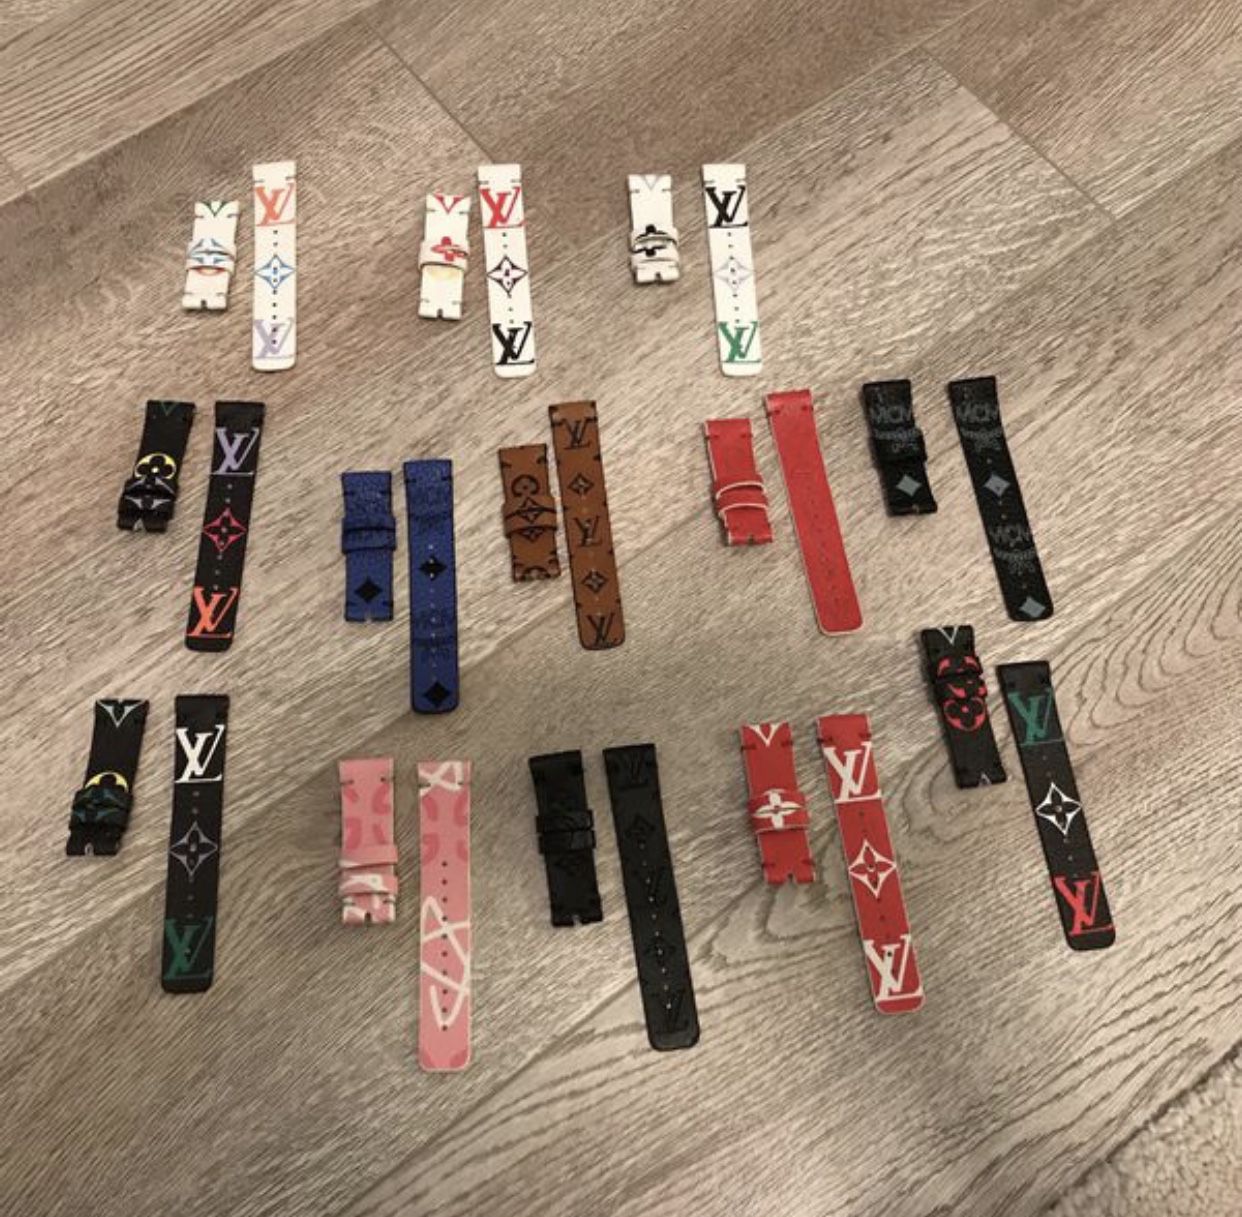 Gucci Inspired Apple Watch Band – The Bag Broker